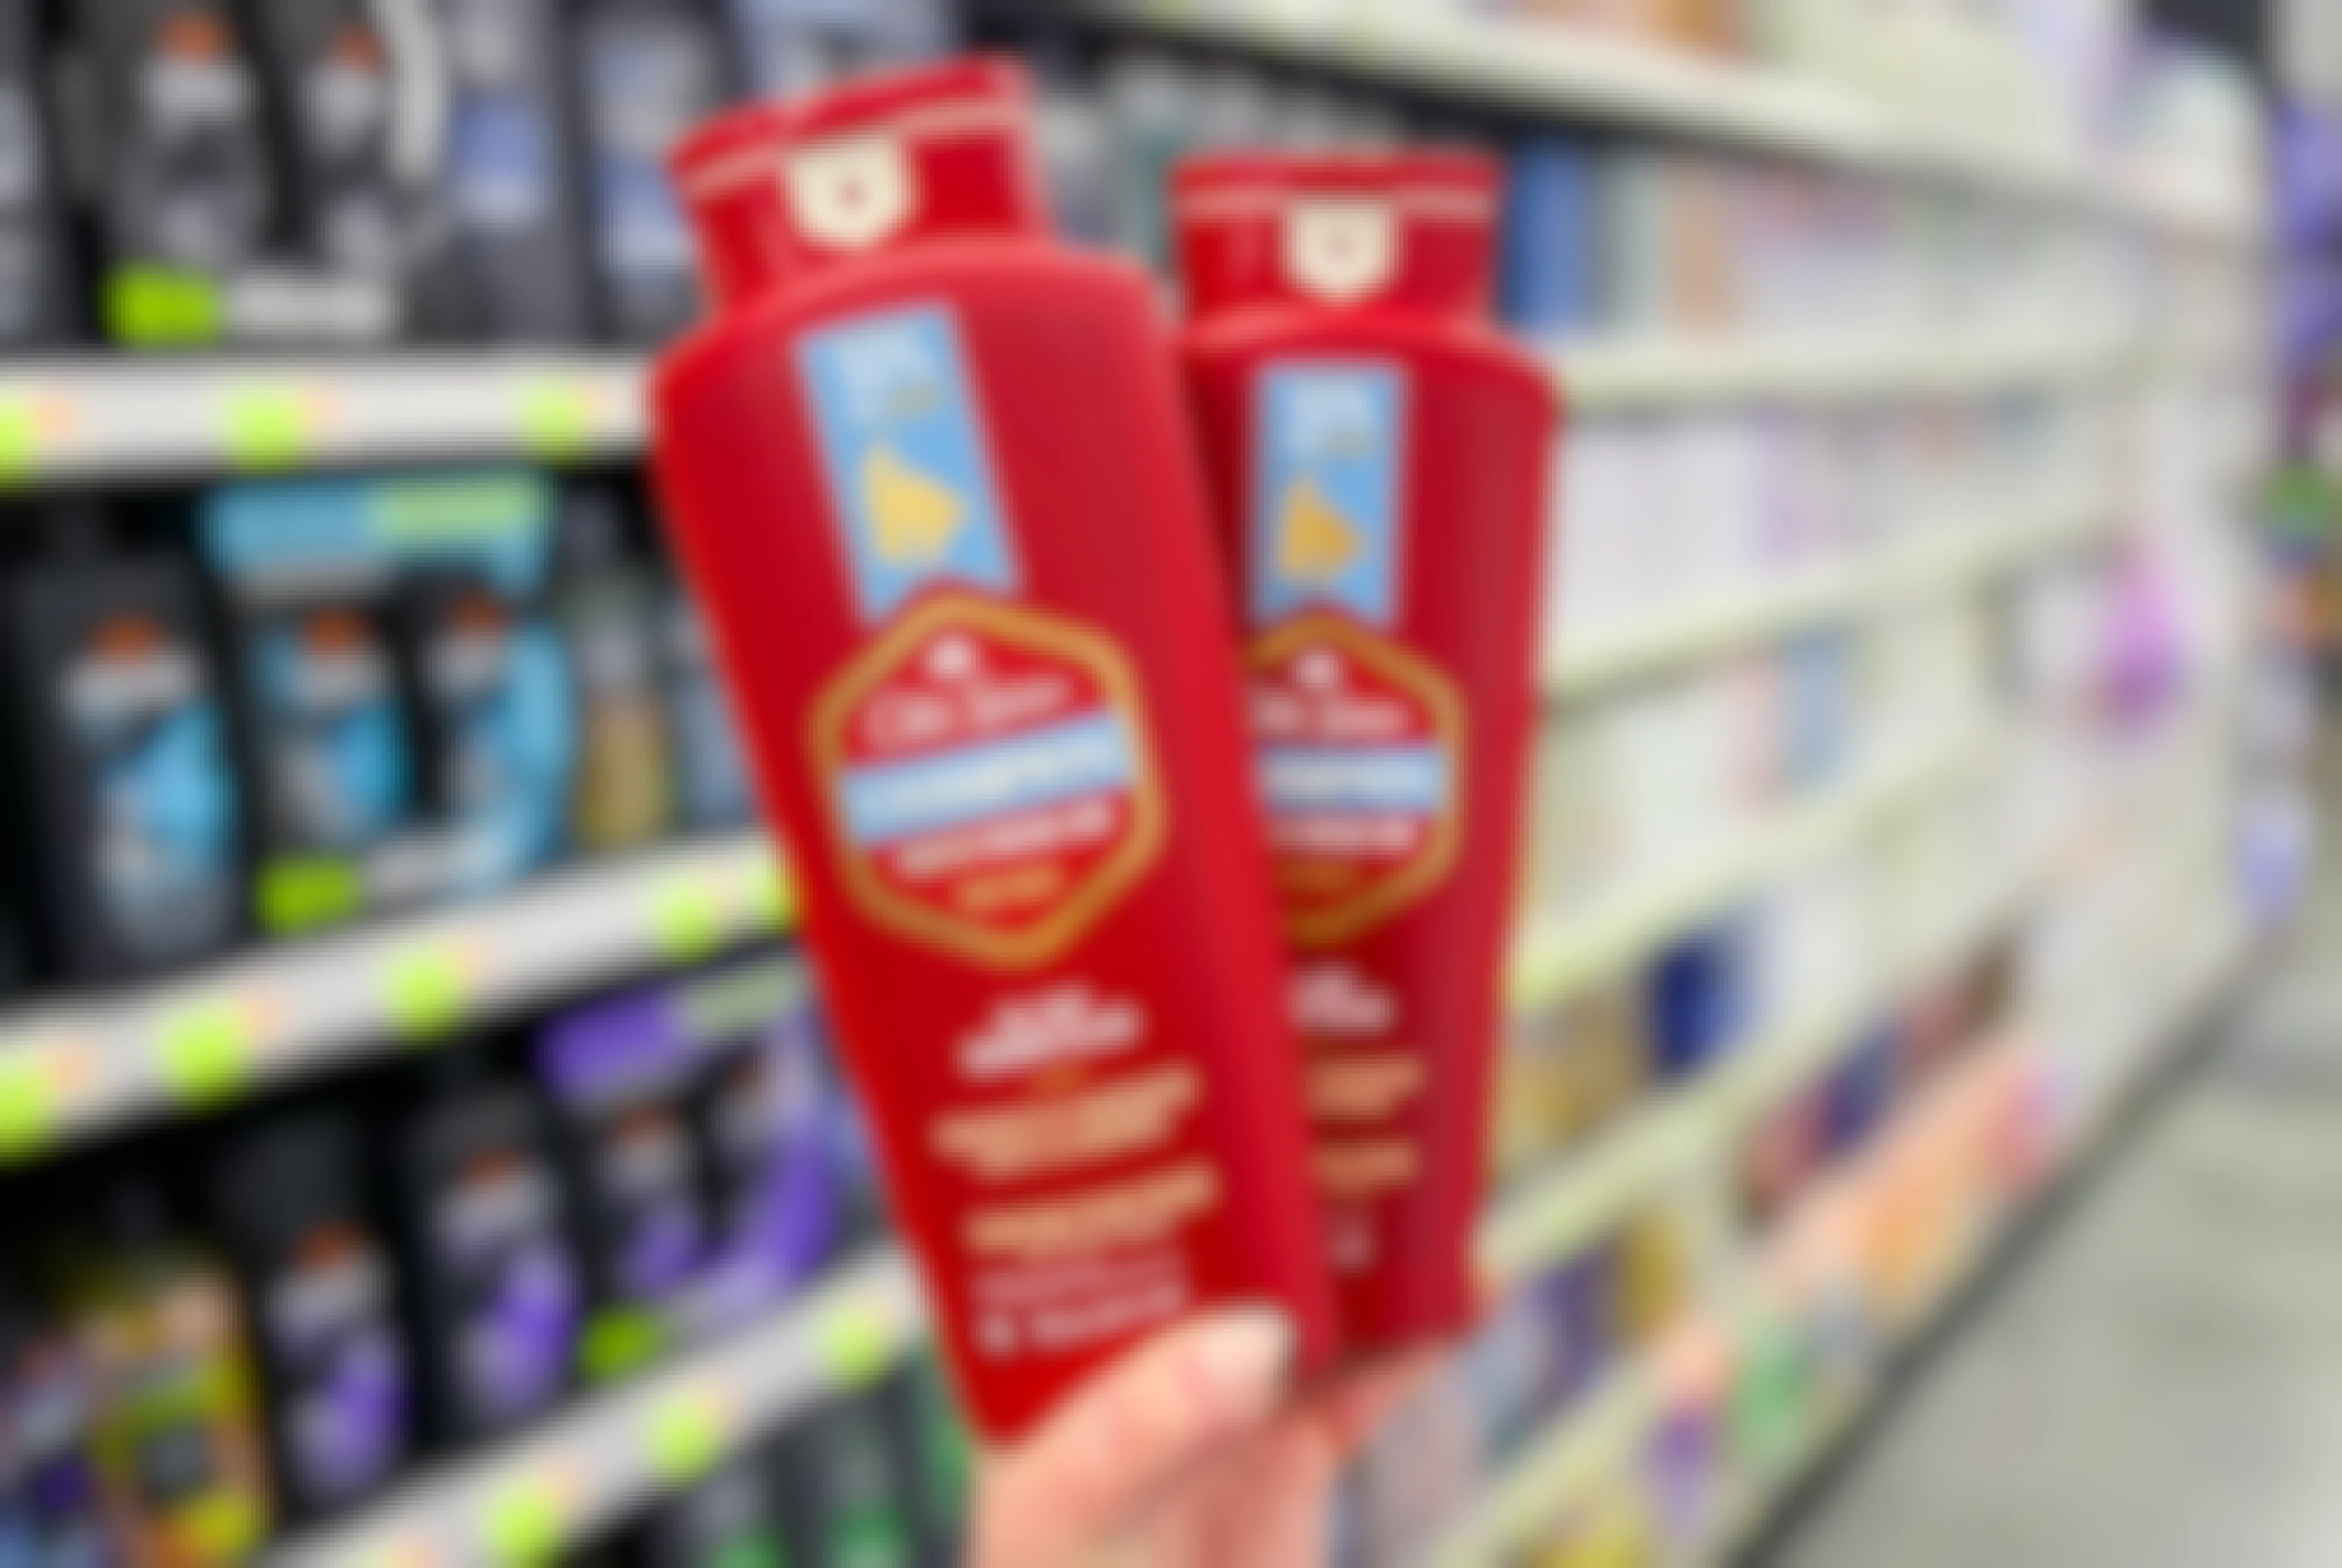 This Week's Walgreens Deals Under $1: Free Covergirl, $0.67 Old Spice Body Wash, & More